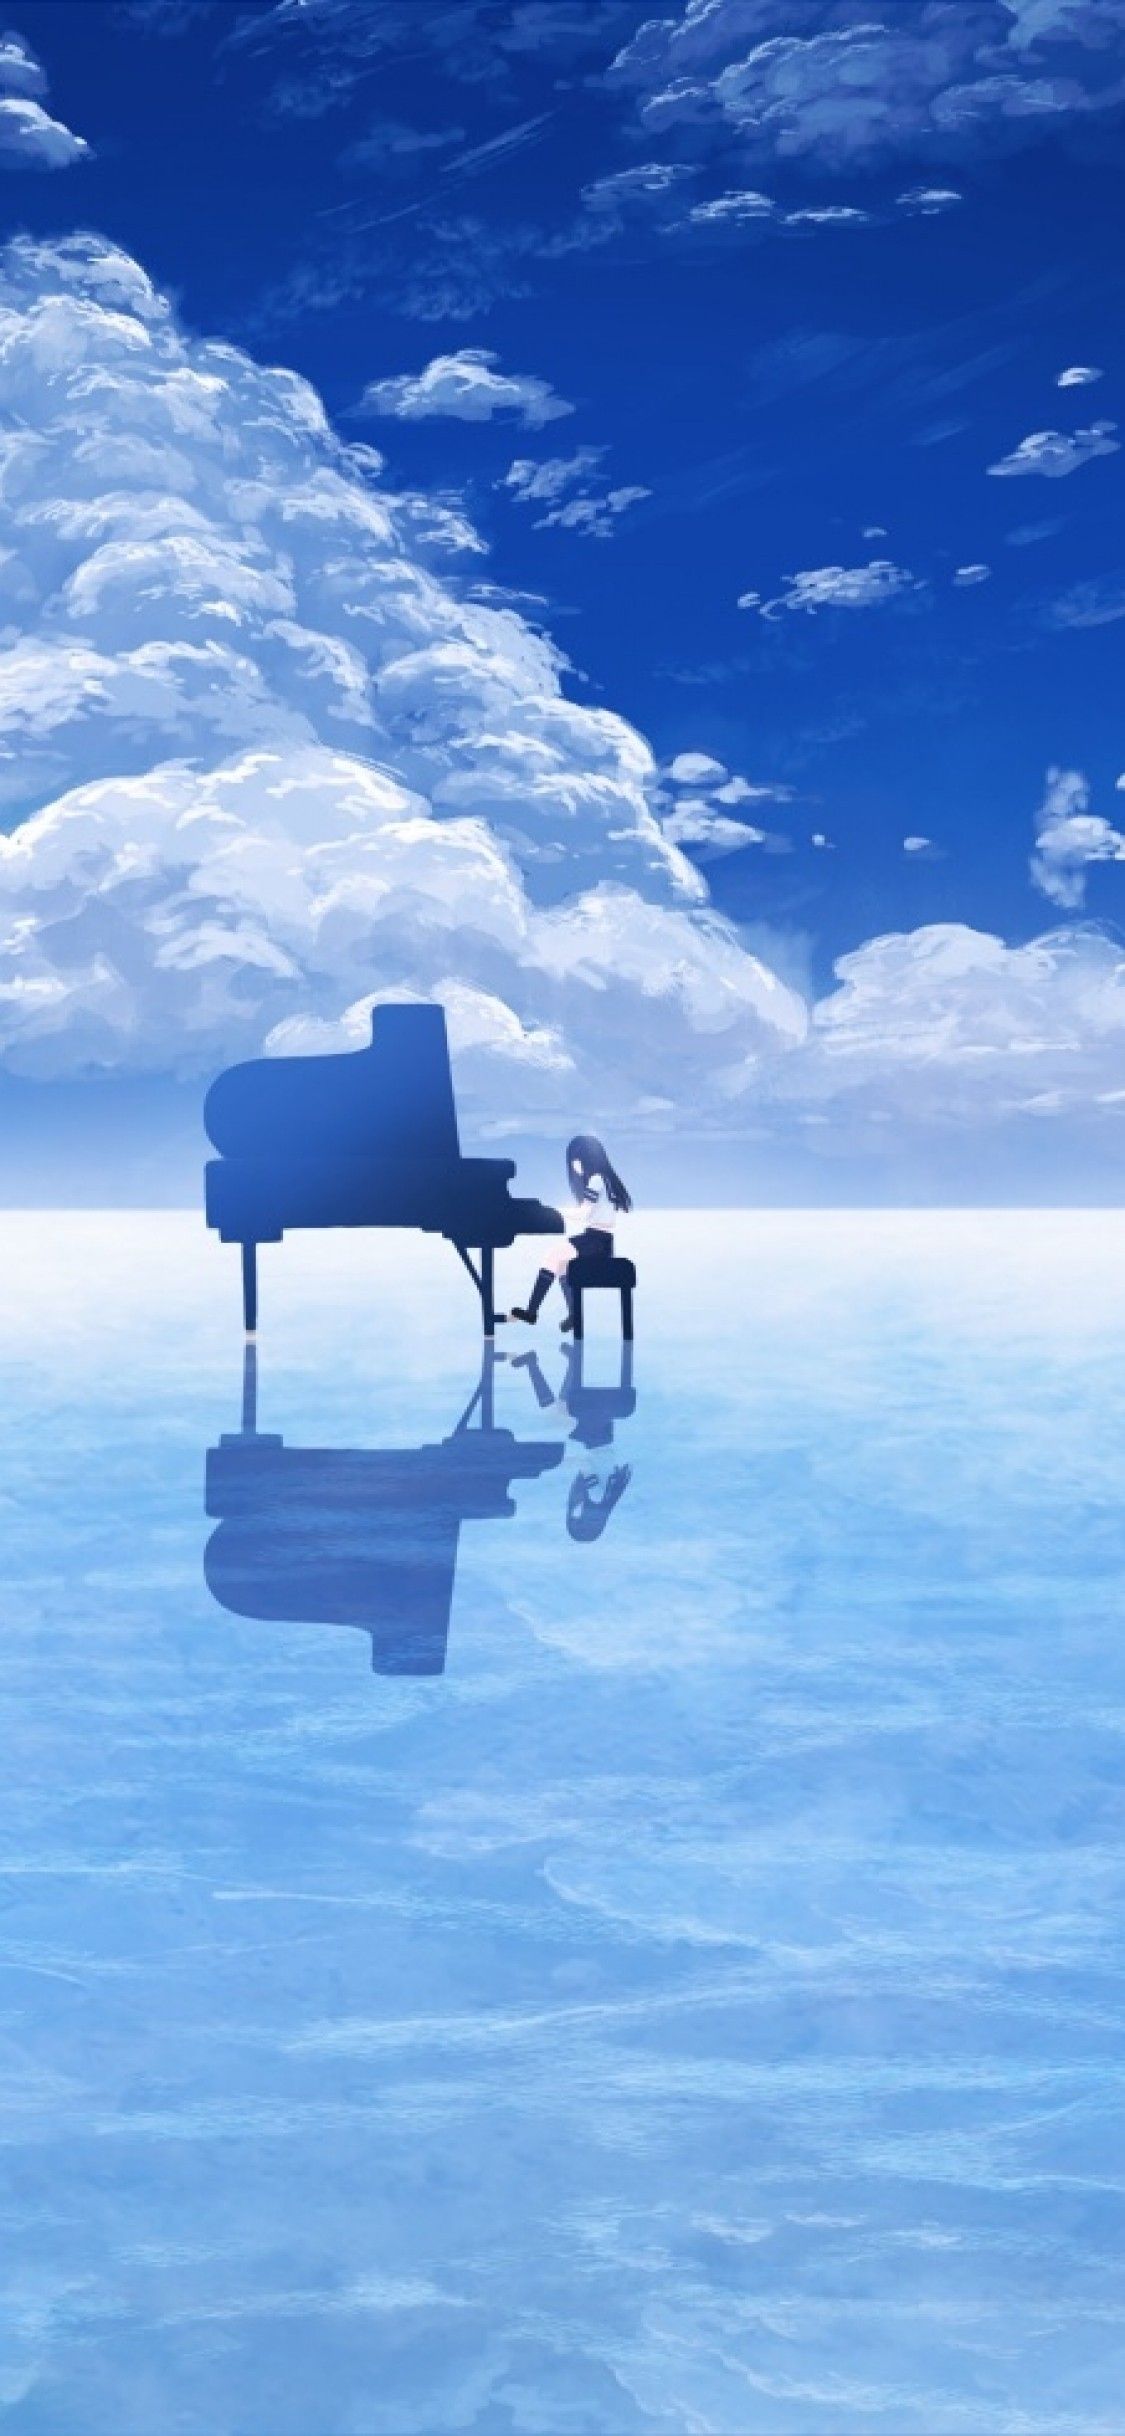 1125x2436 Download 1125x2436 Anime Girl, Beyond The Clouds, Piano, Sky, Instrument, Scenic Wallpaper for iPhone X on WallpaperBat